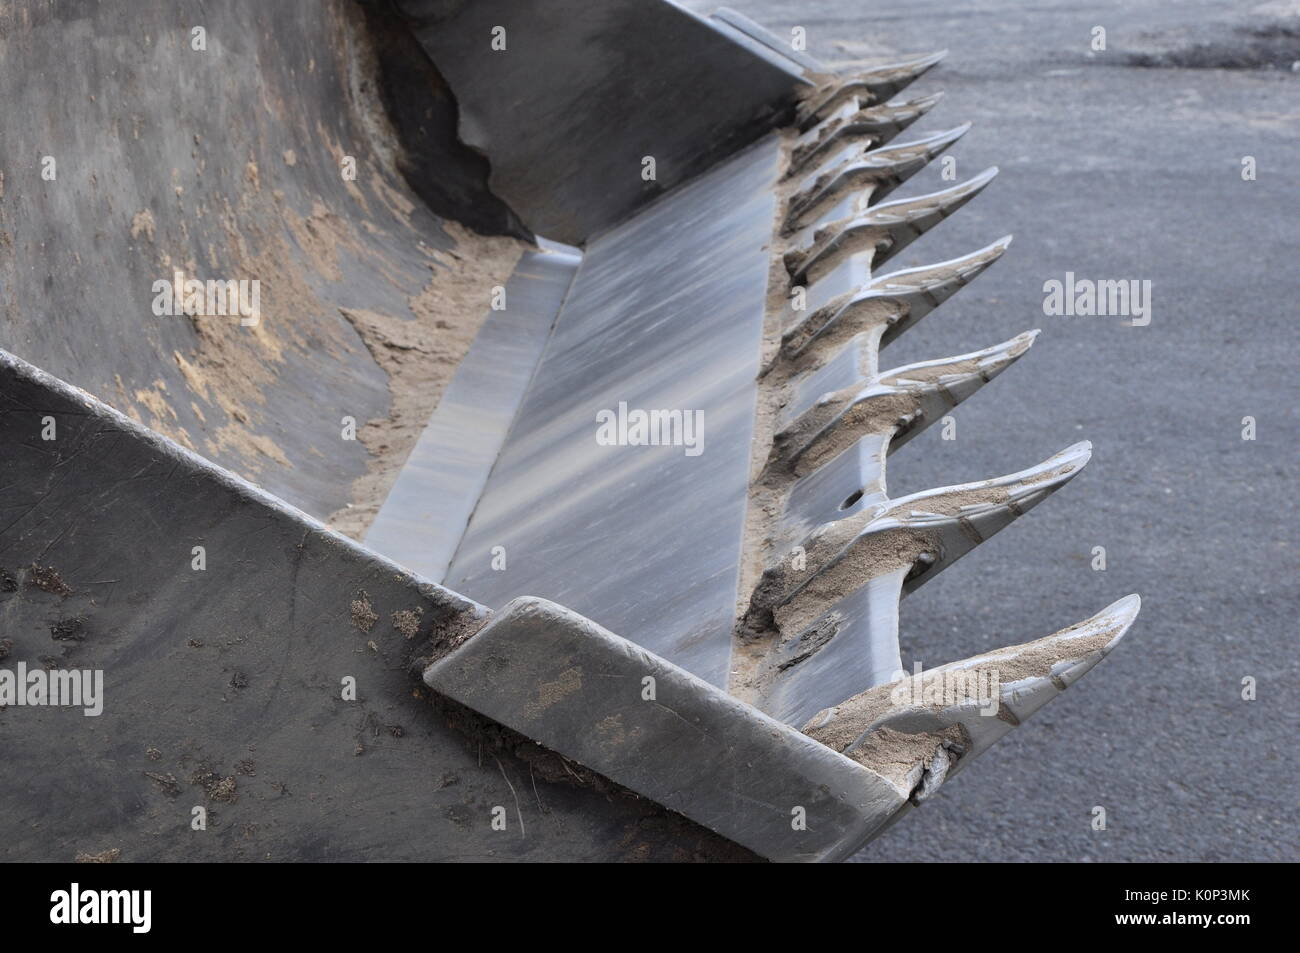 Empty bucket of excavator with traces of sand and soil on the glossy teeth and surfaces against asphalt background. Stock Photo